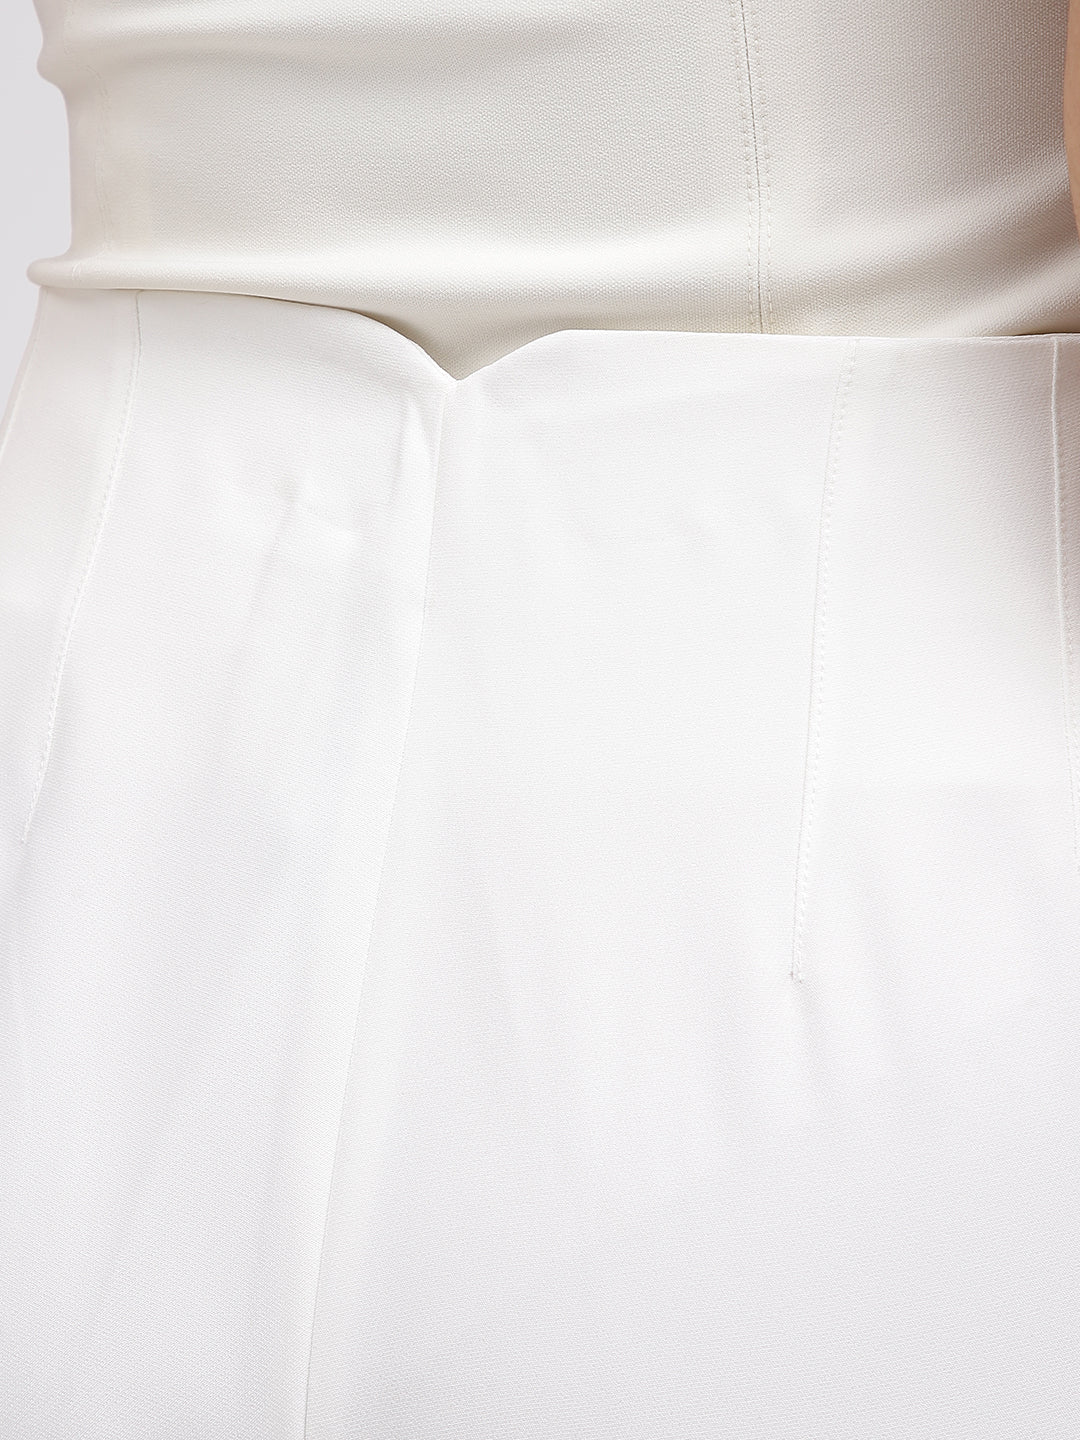 Centre Stage Women White Solid Tapered Fit Trouser